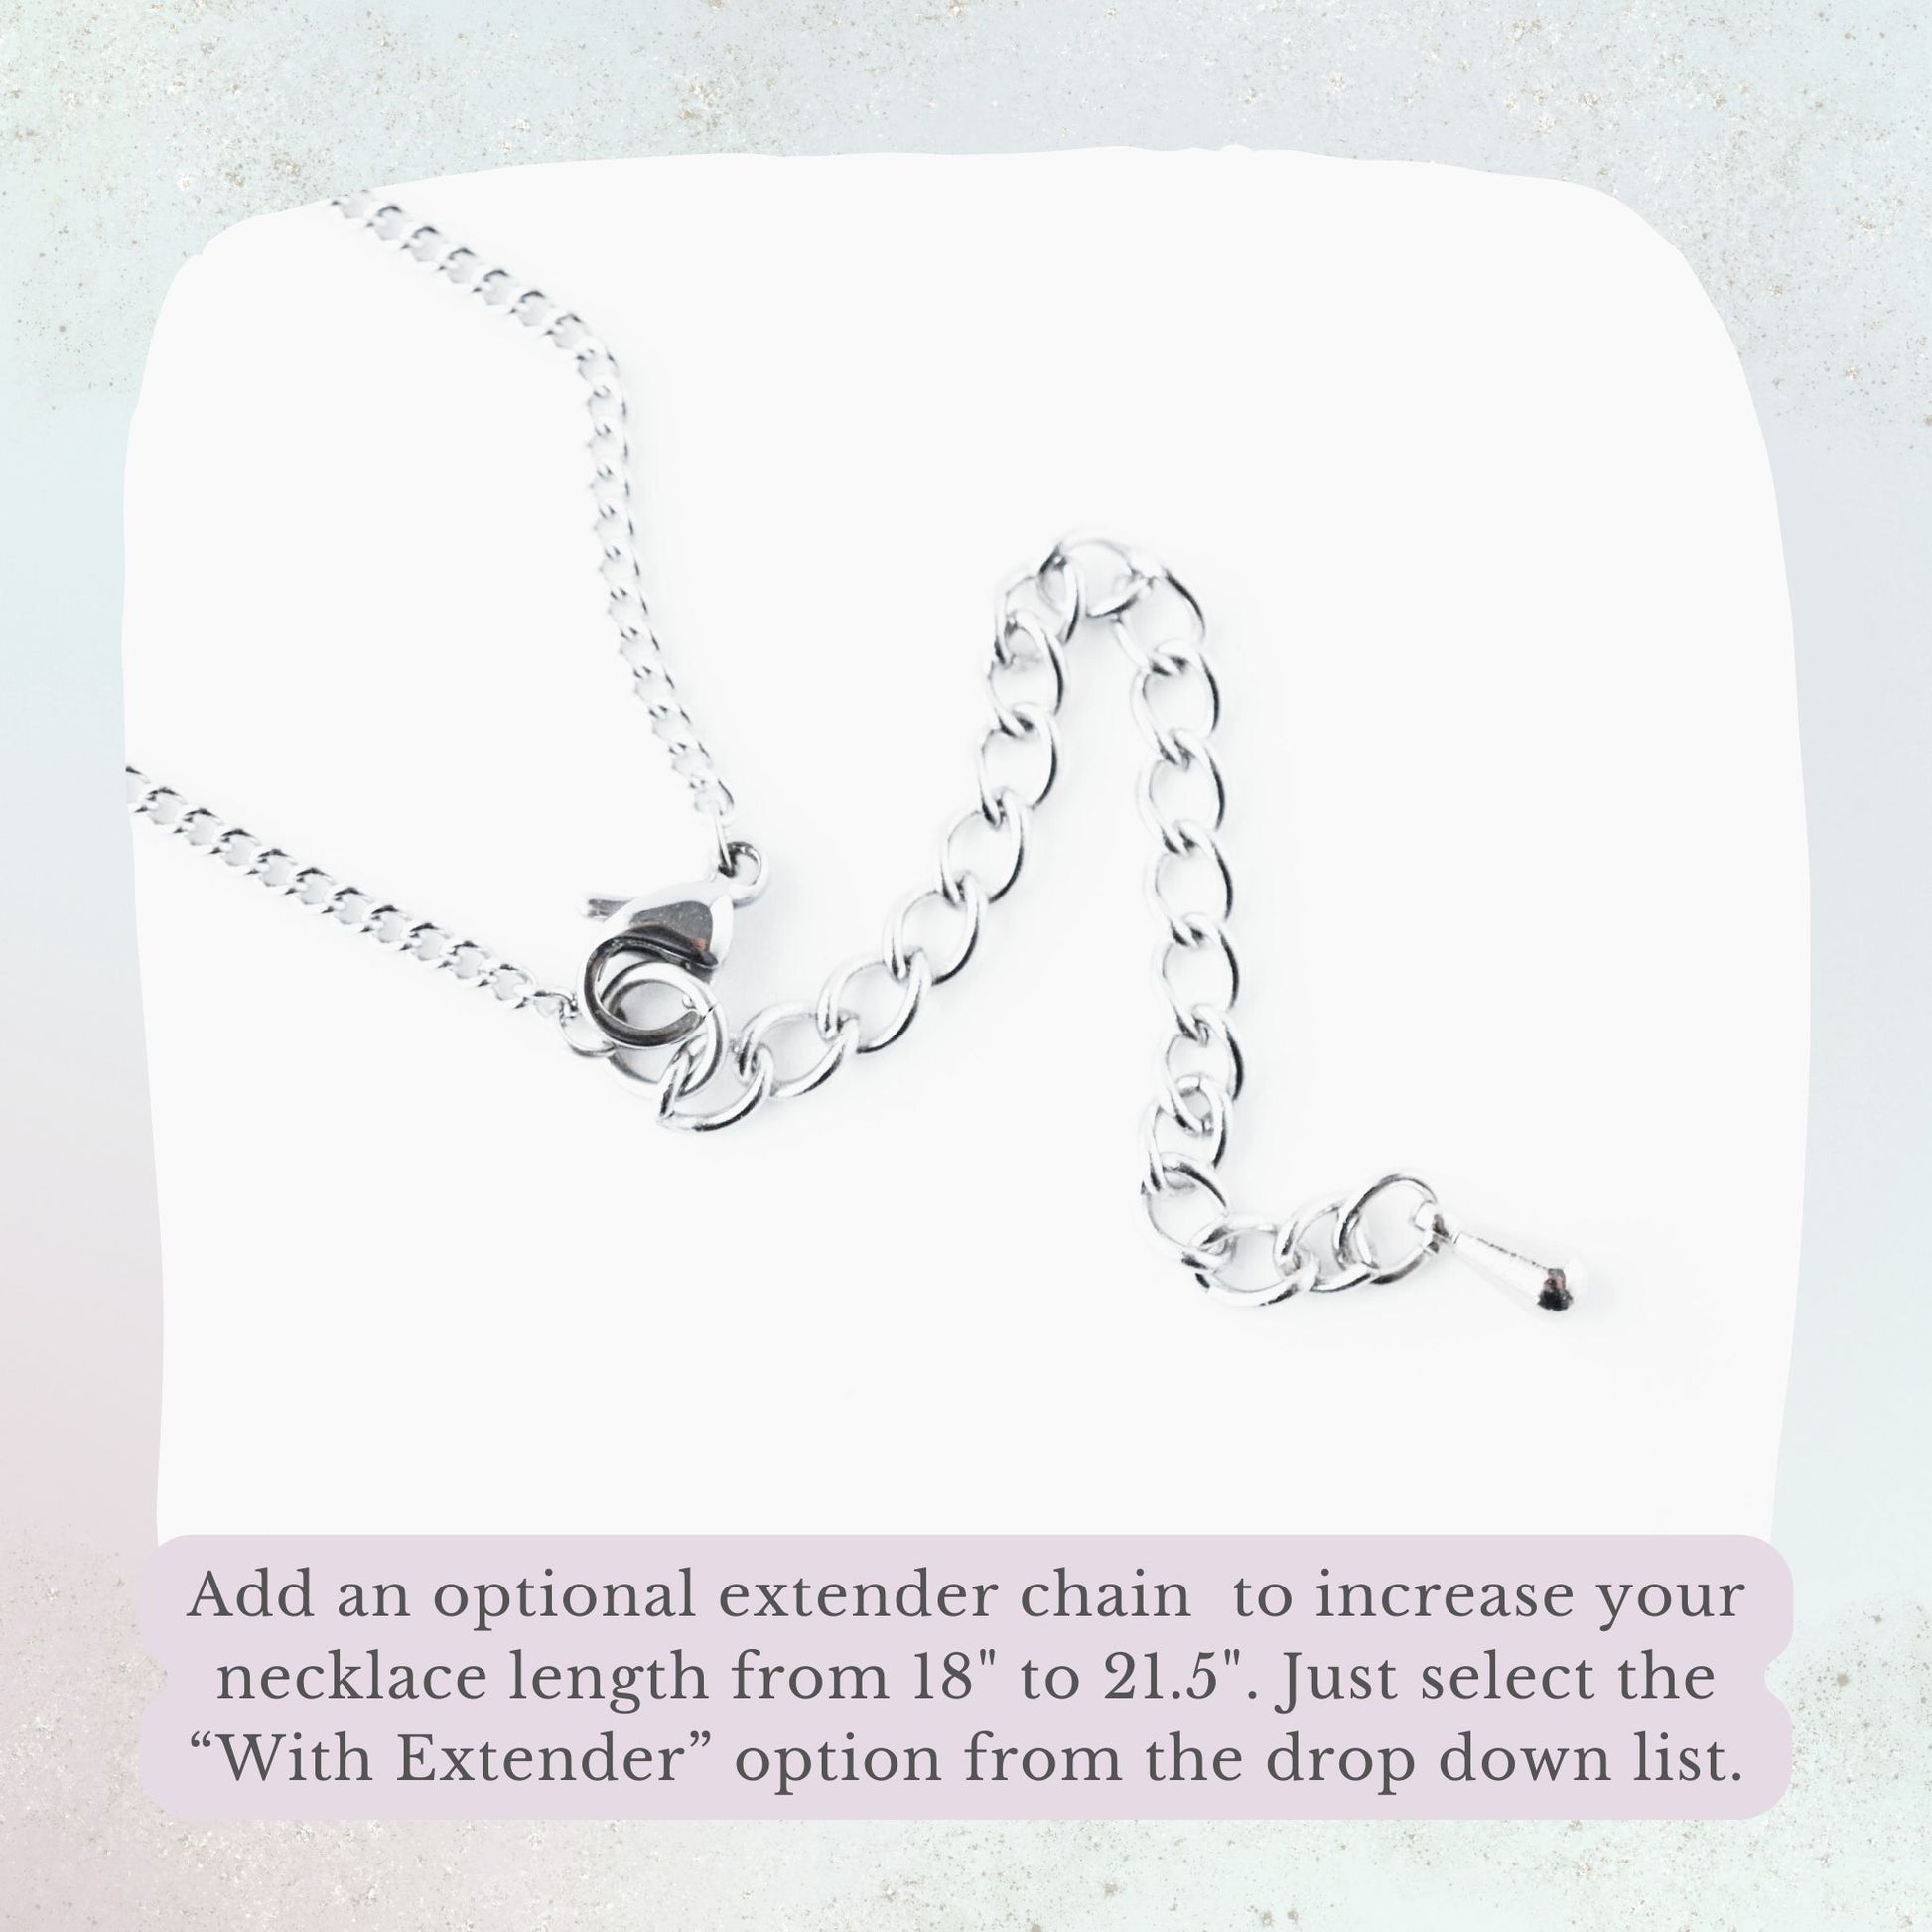 Optional extender chain available graphic